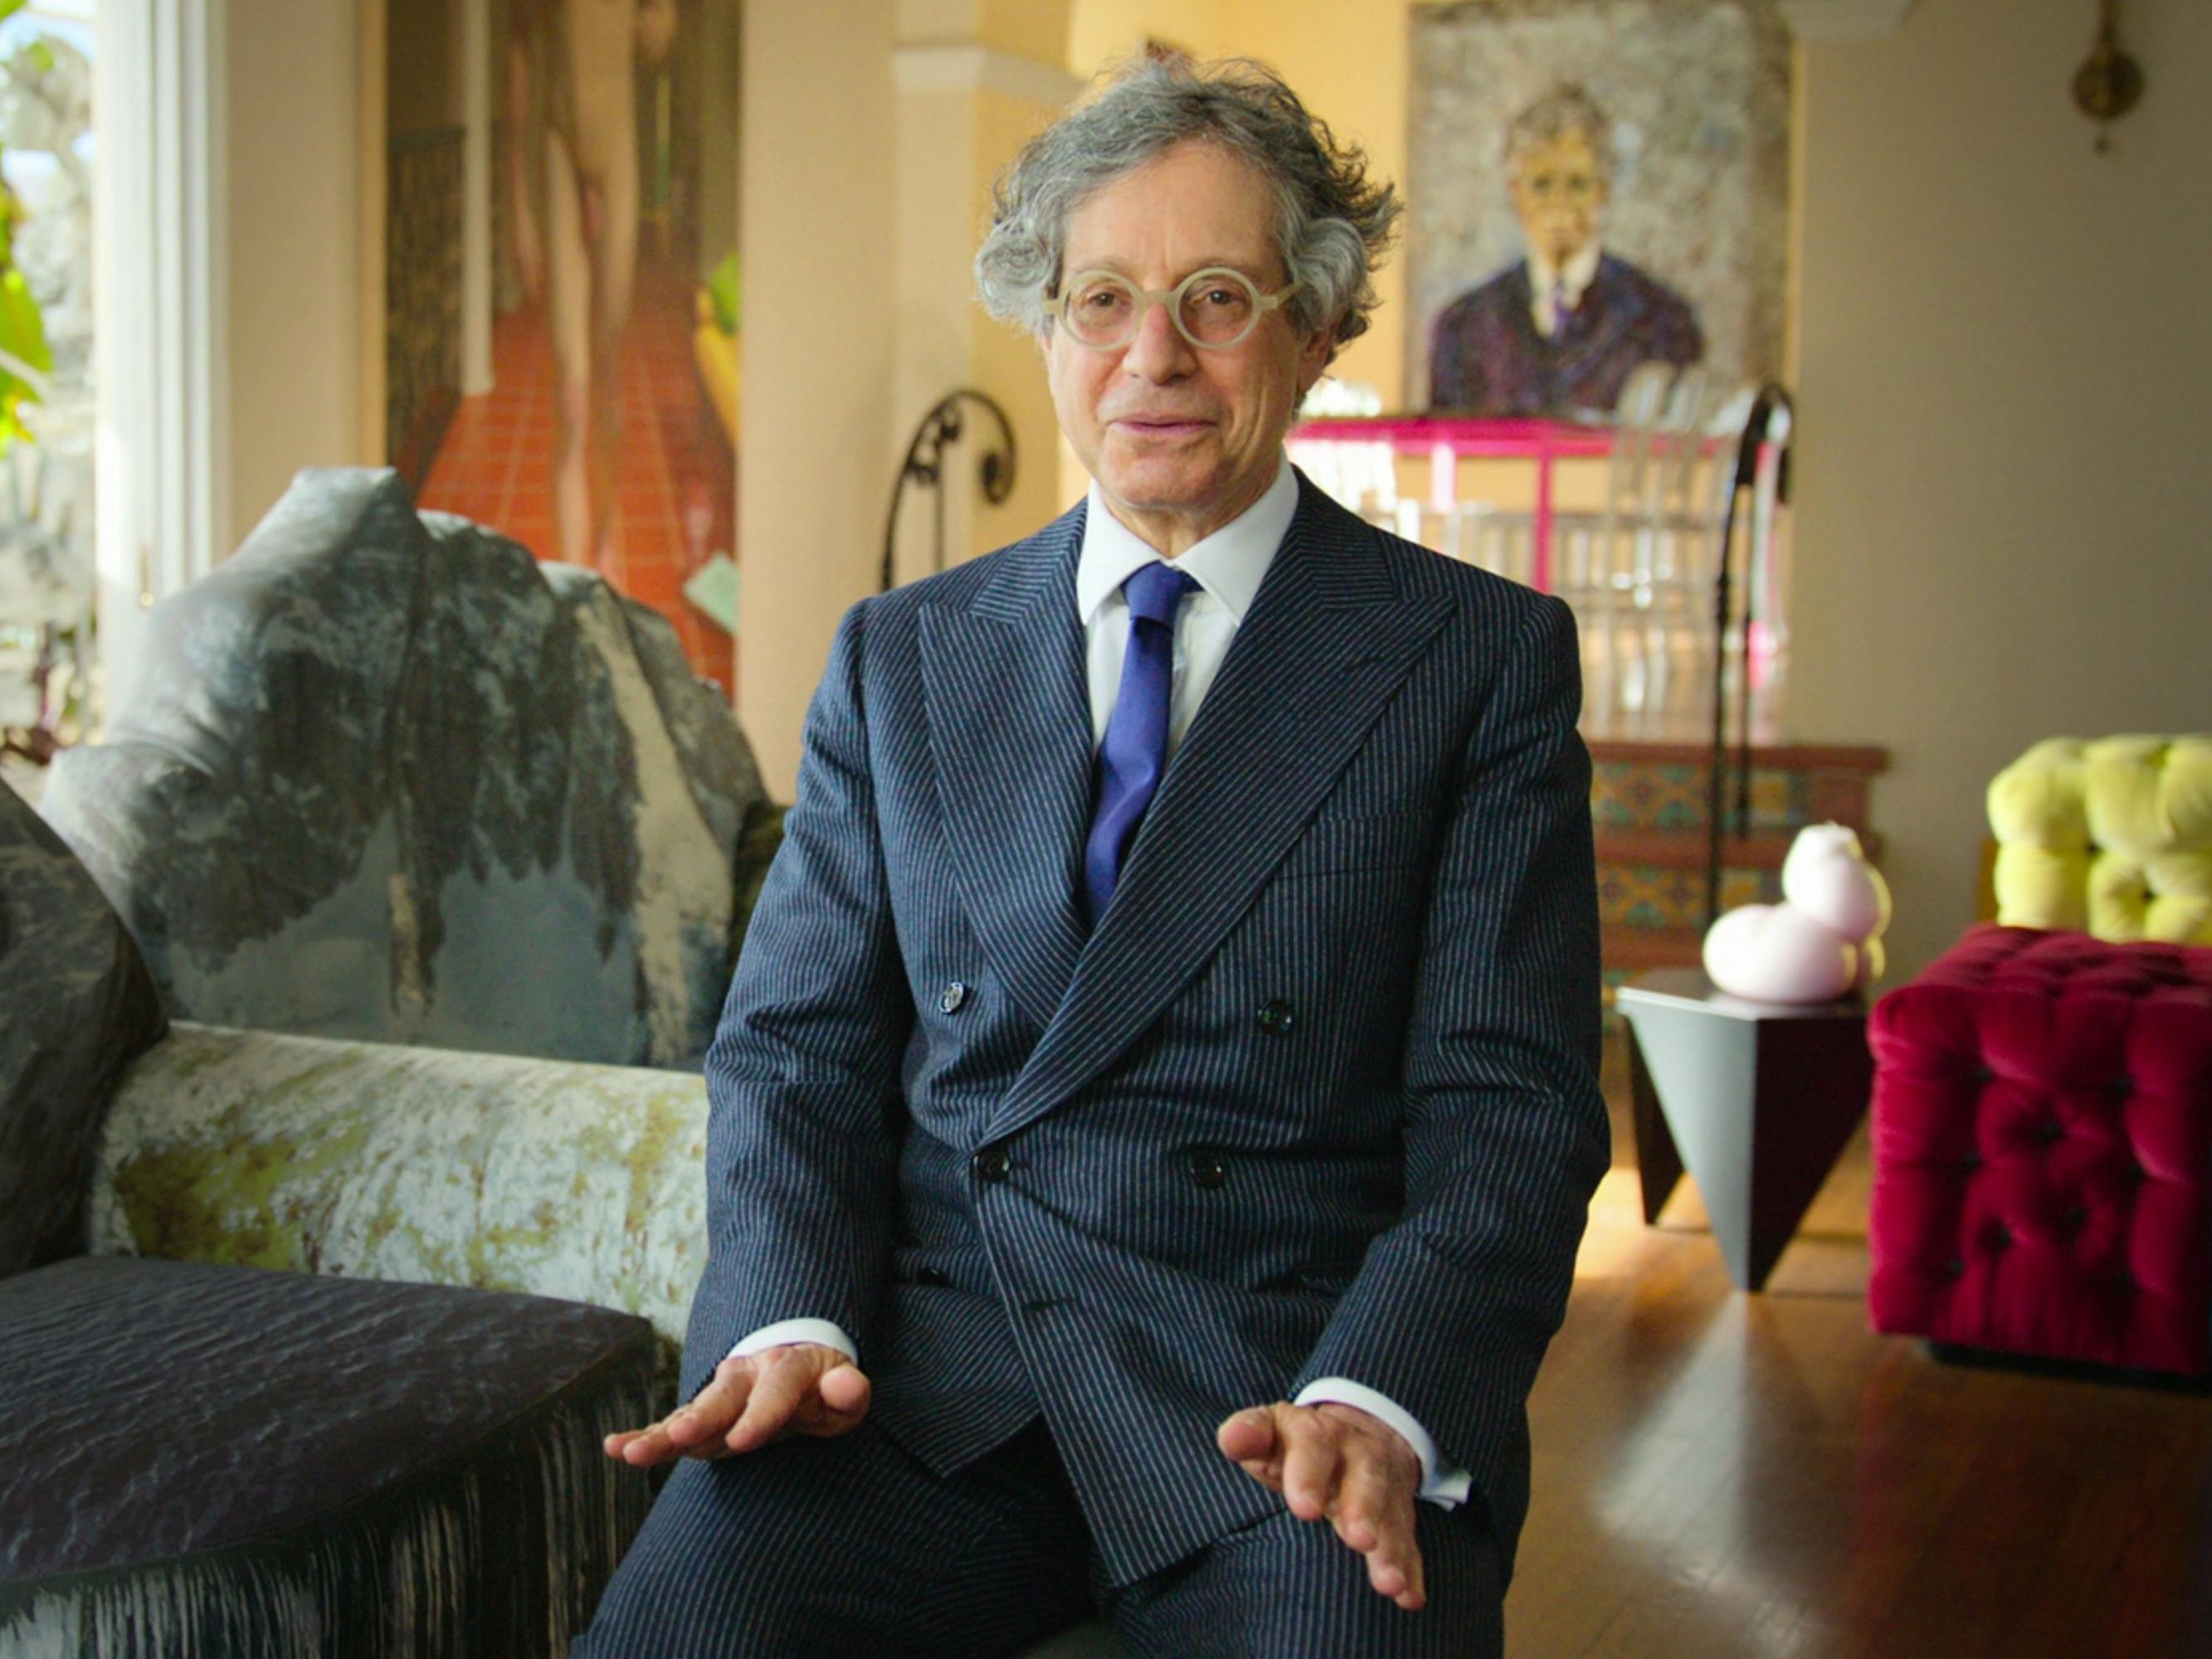 Jeffrey Deitch wears a double breasted suit and blue tie.